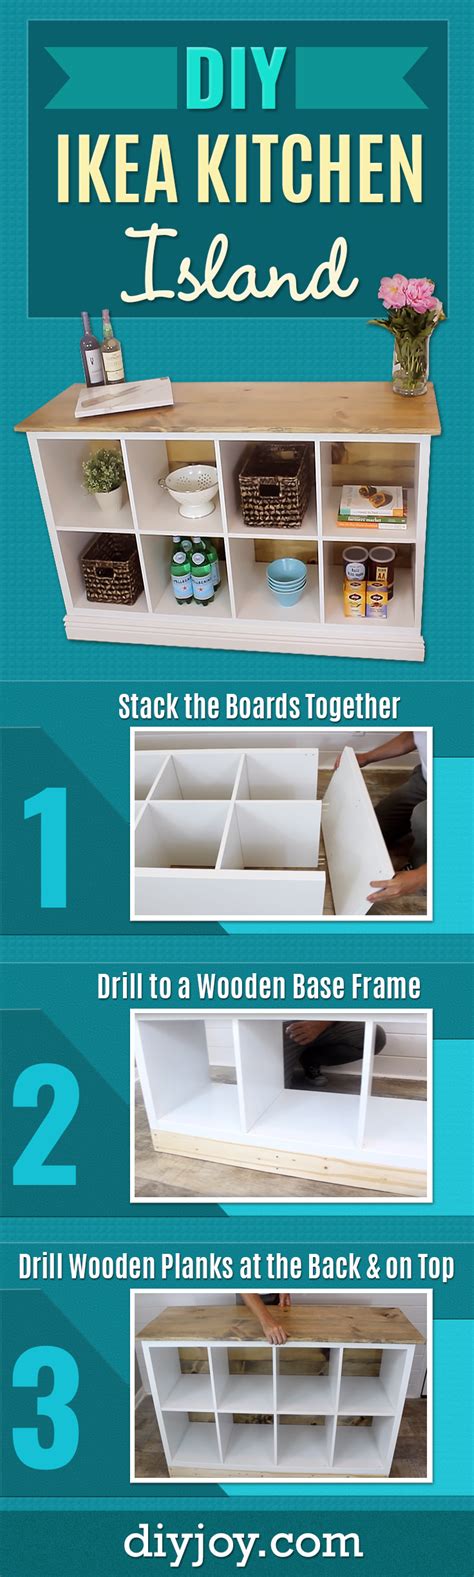 How to Build A Kitchen Island From An Ikea Shelving Unit